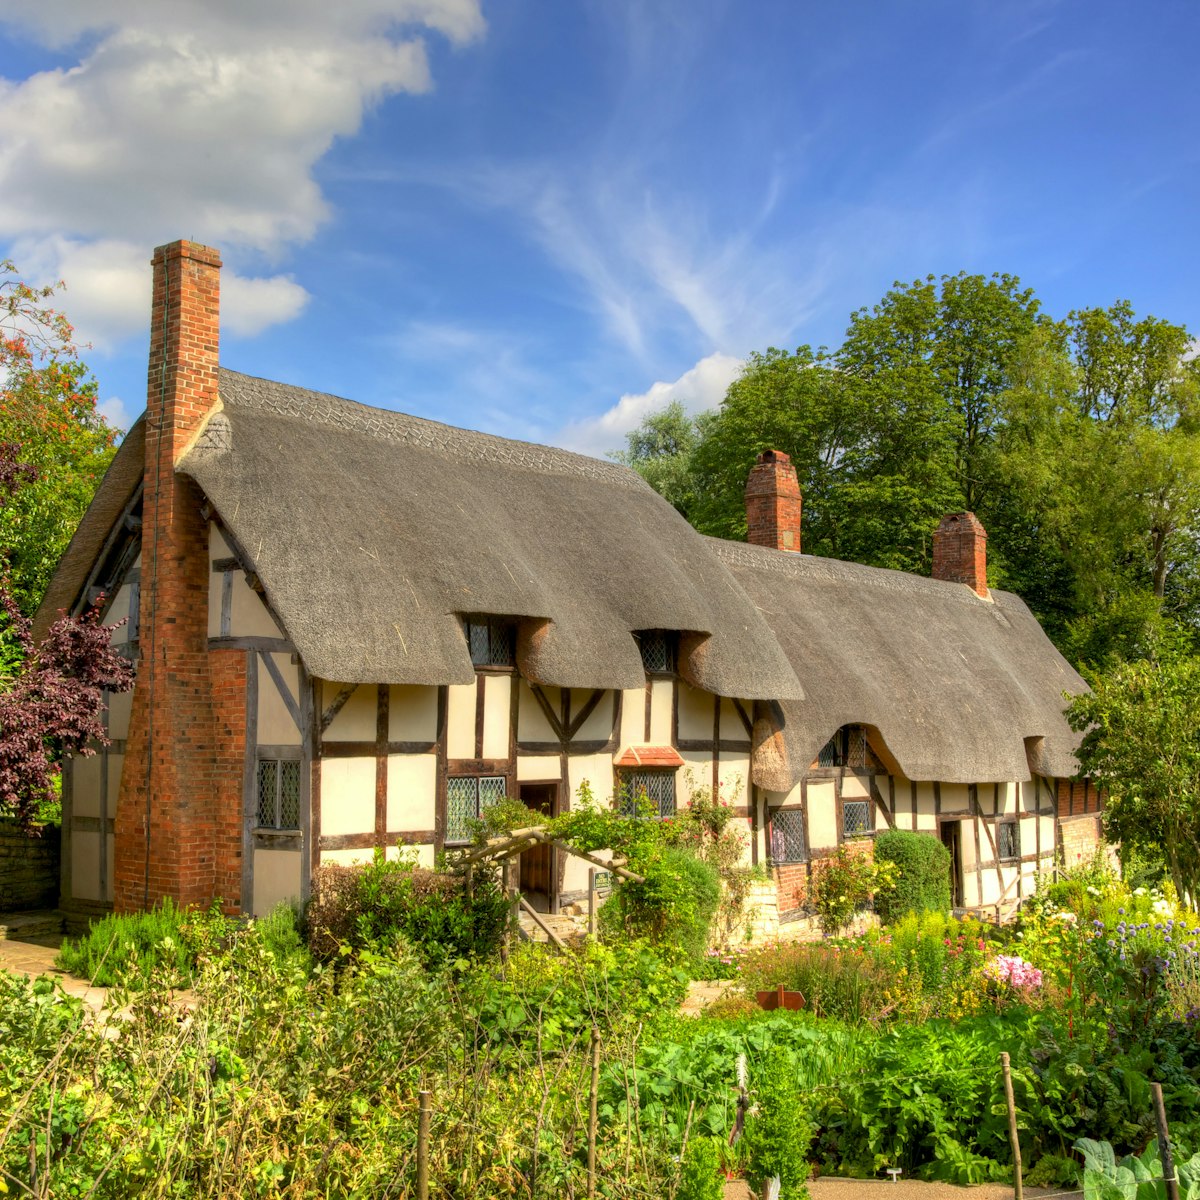 Anne Hathaway's (William Shakespeare's wife) famous thatched cottage and garden at Shottery, just outside Stratford upon Avon, England.